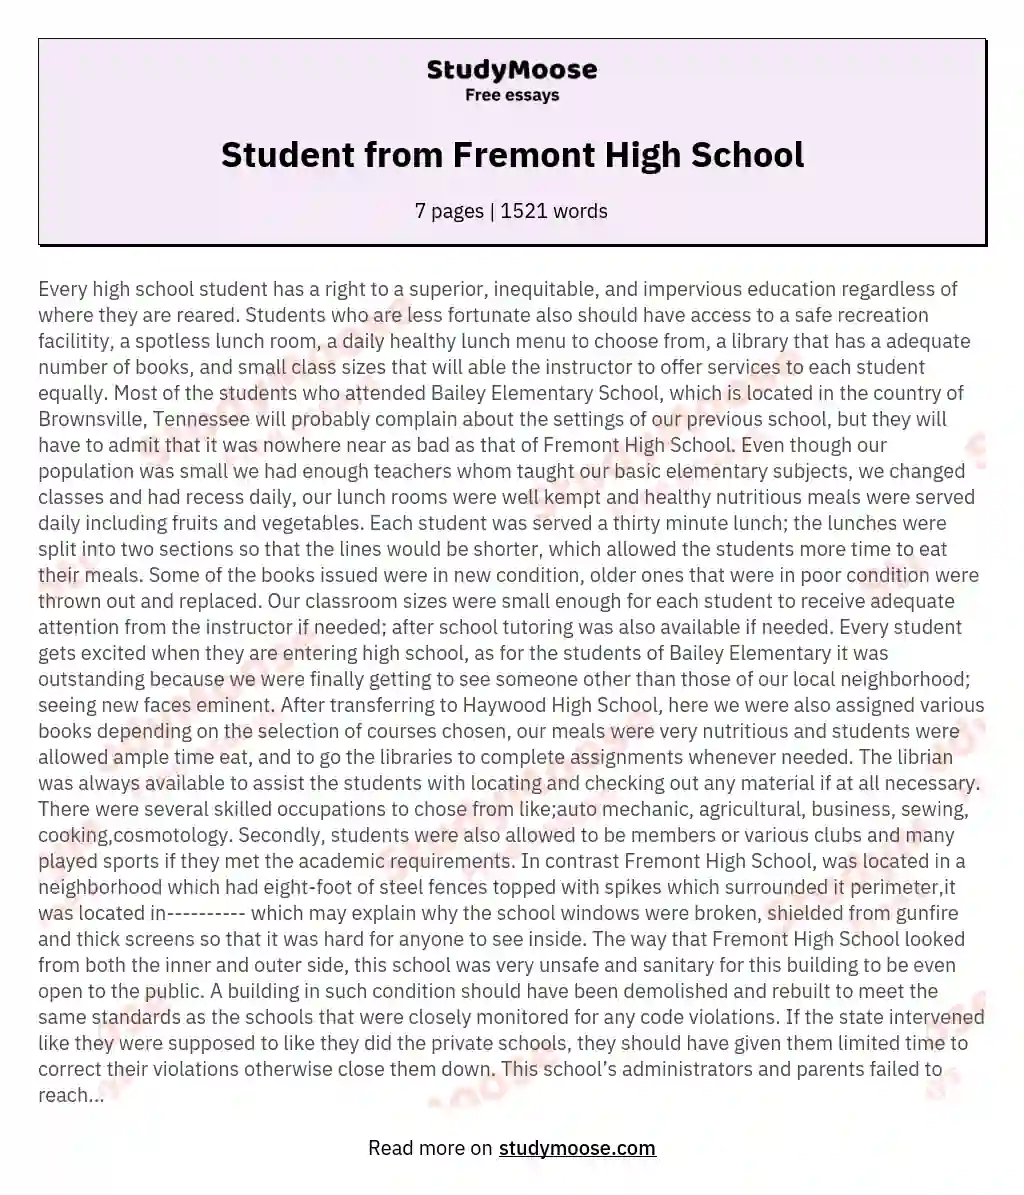 Student from Fremont High School essay